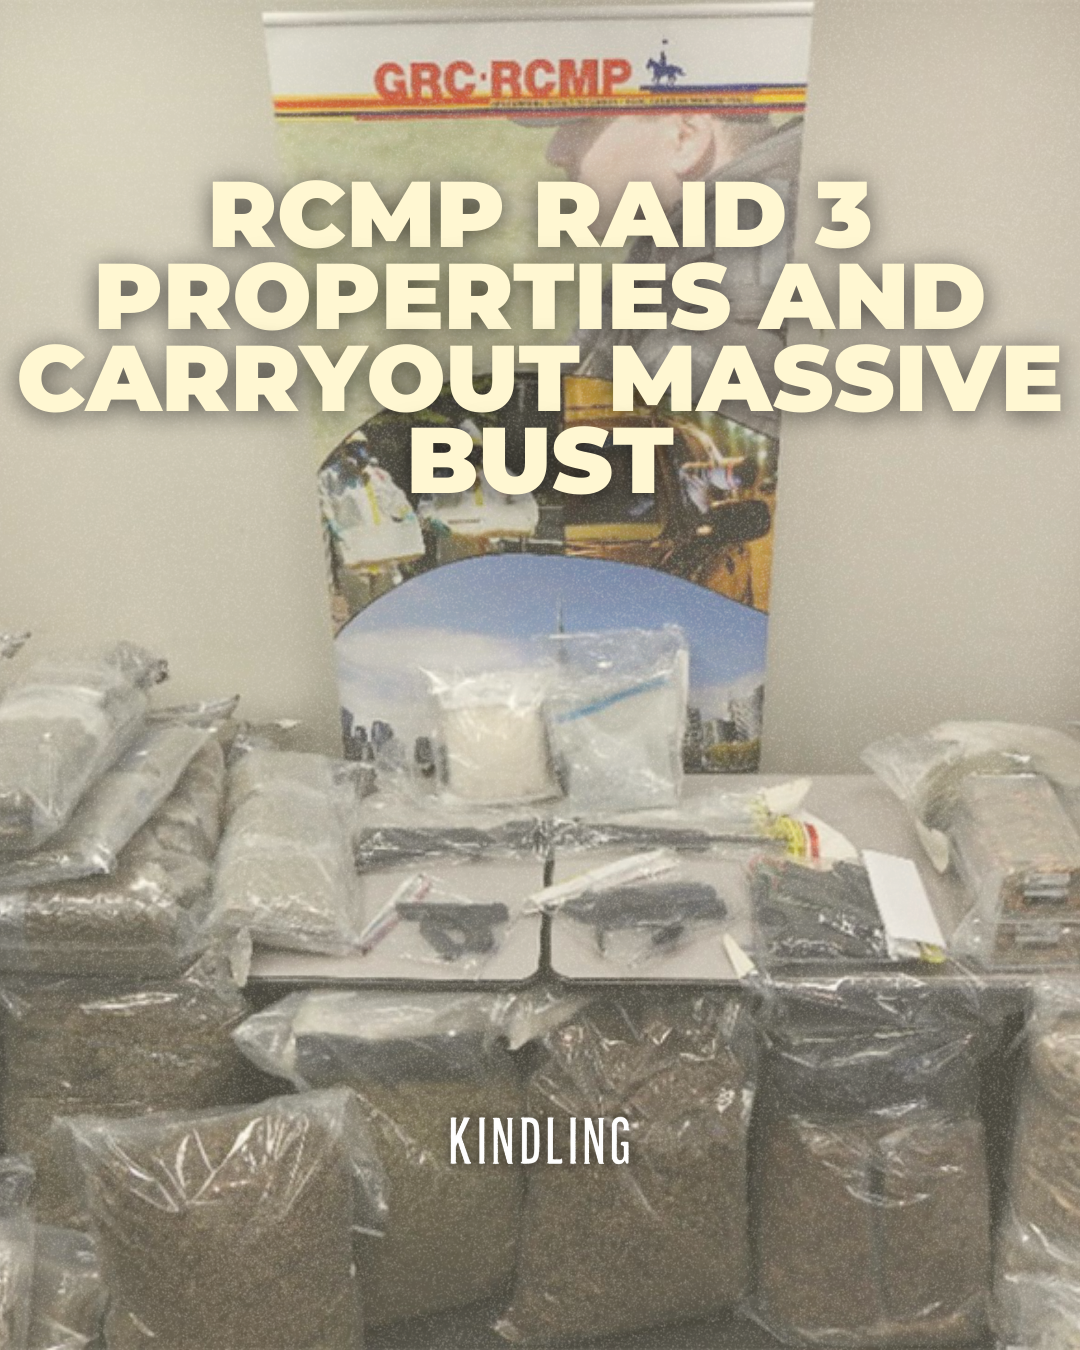 RCMP Raid 3 Ontario Properties and Carryout Massive Drug Bust